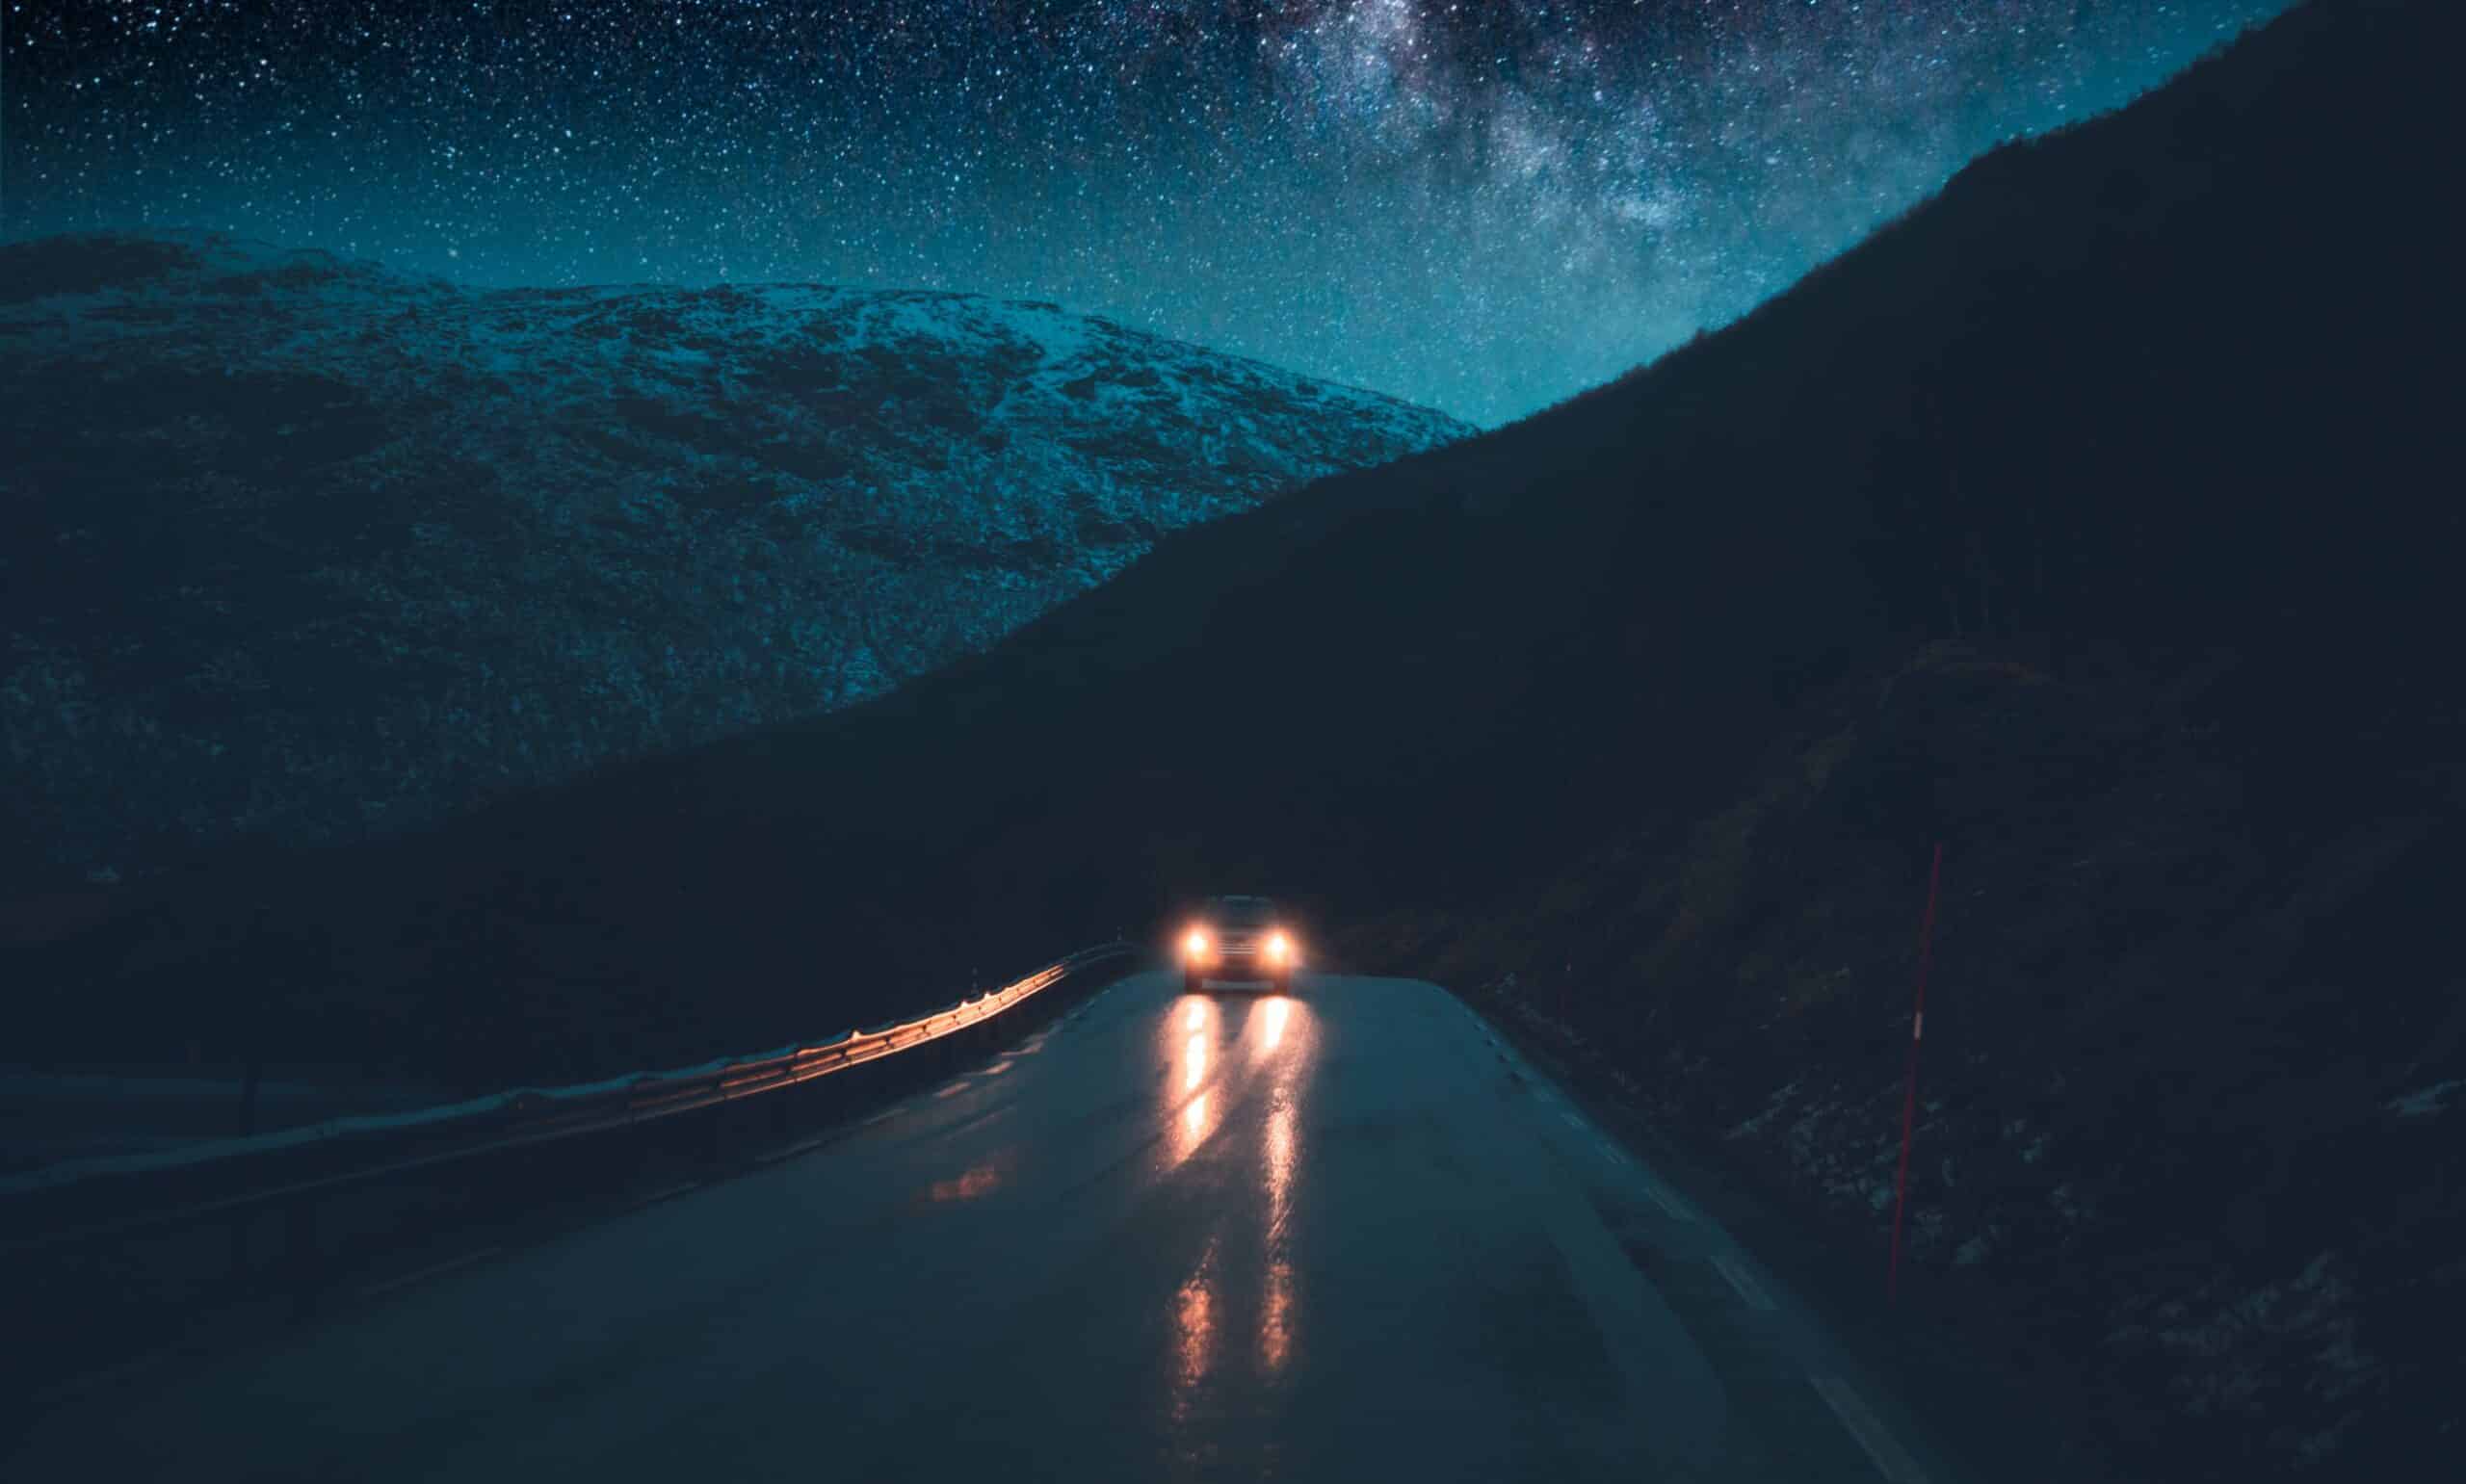 A car driving at night on a mountain road under the stars